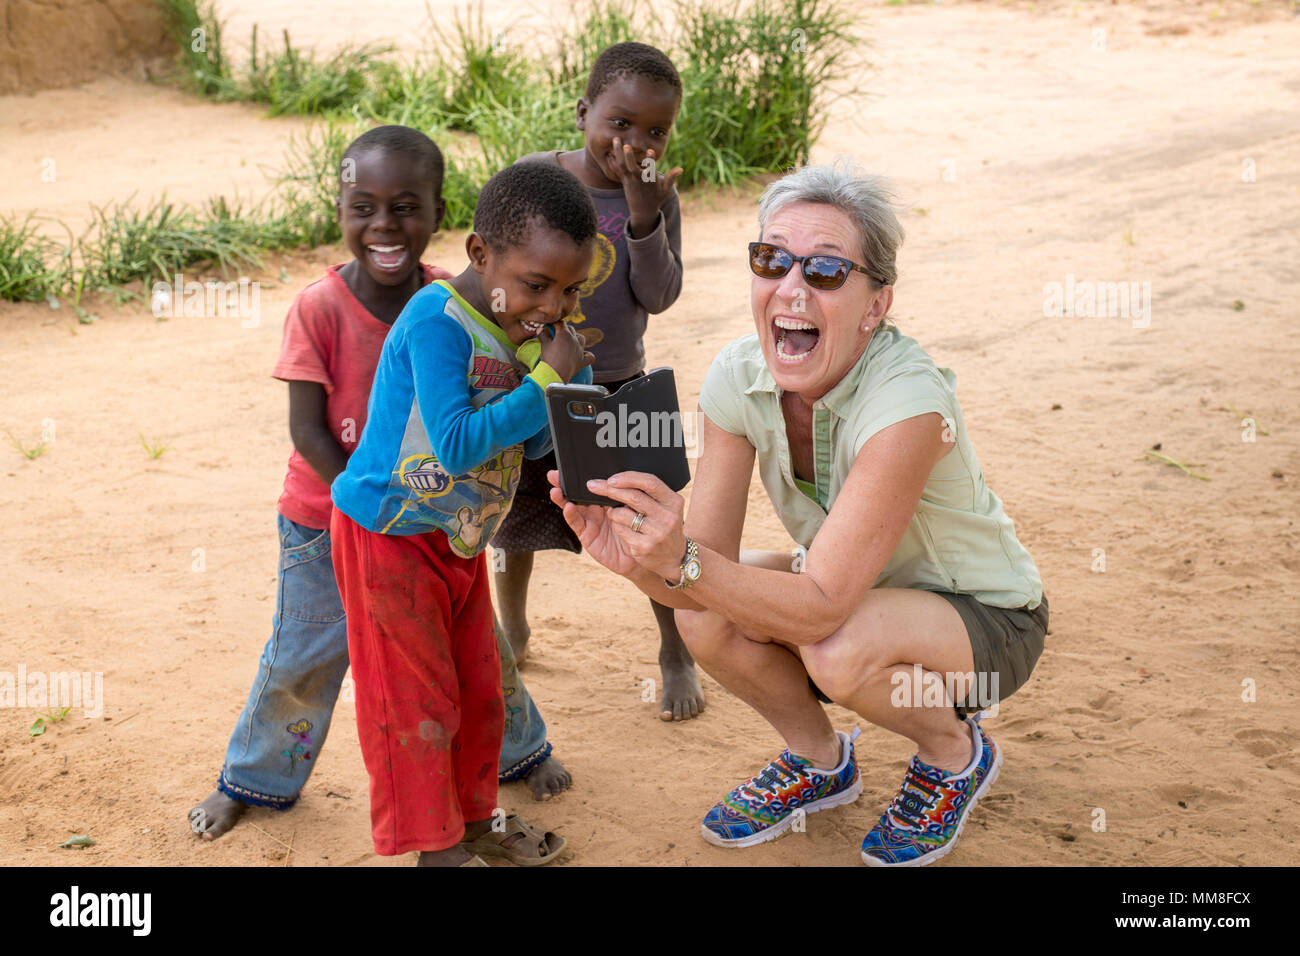 A woman excitedly shares something on her phone with a group of young boys. Livingstone, Zambia Stock Photo